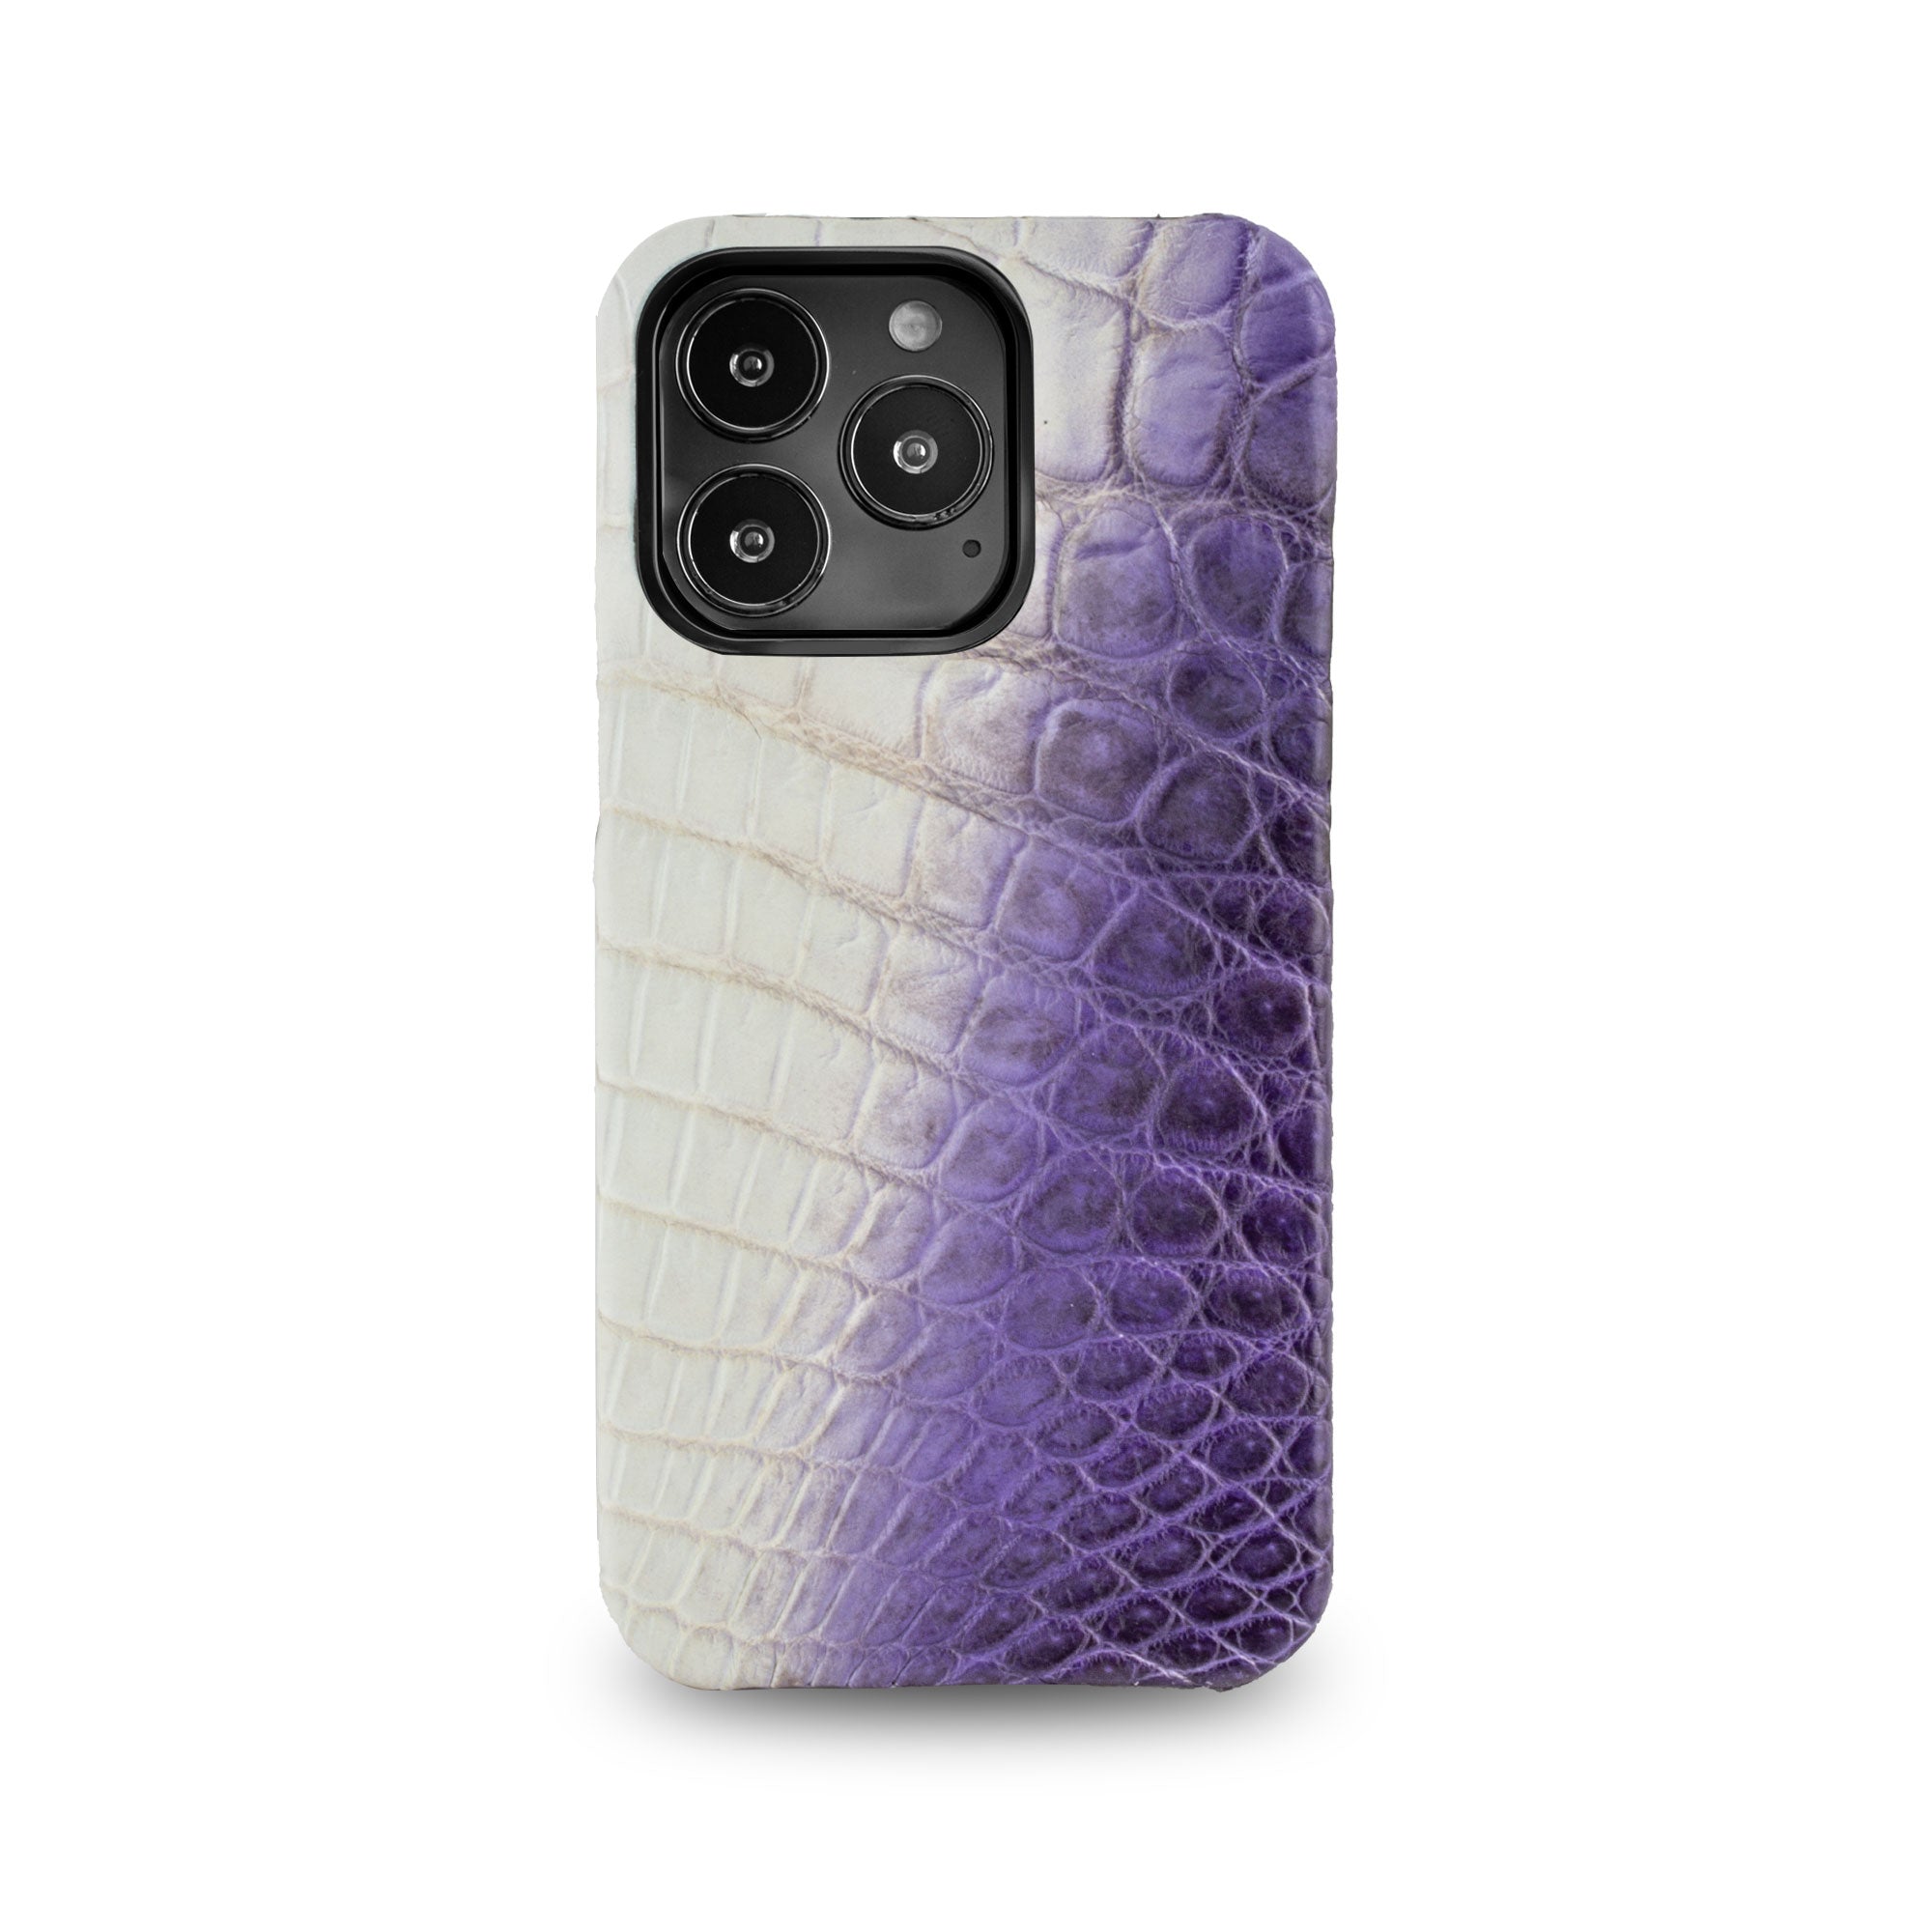 Coque cuir Himalaya pour iPhone 13 ( Pro / Max ) - Alligator